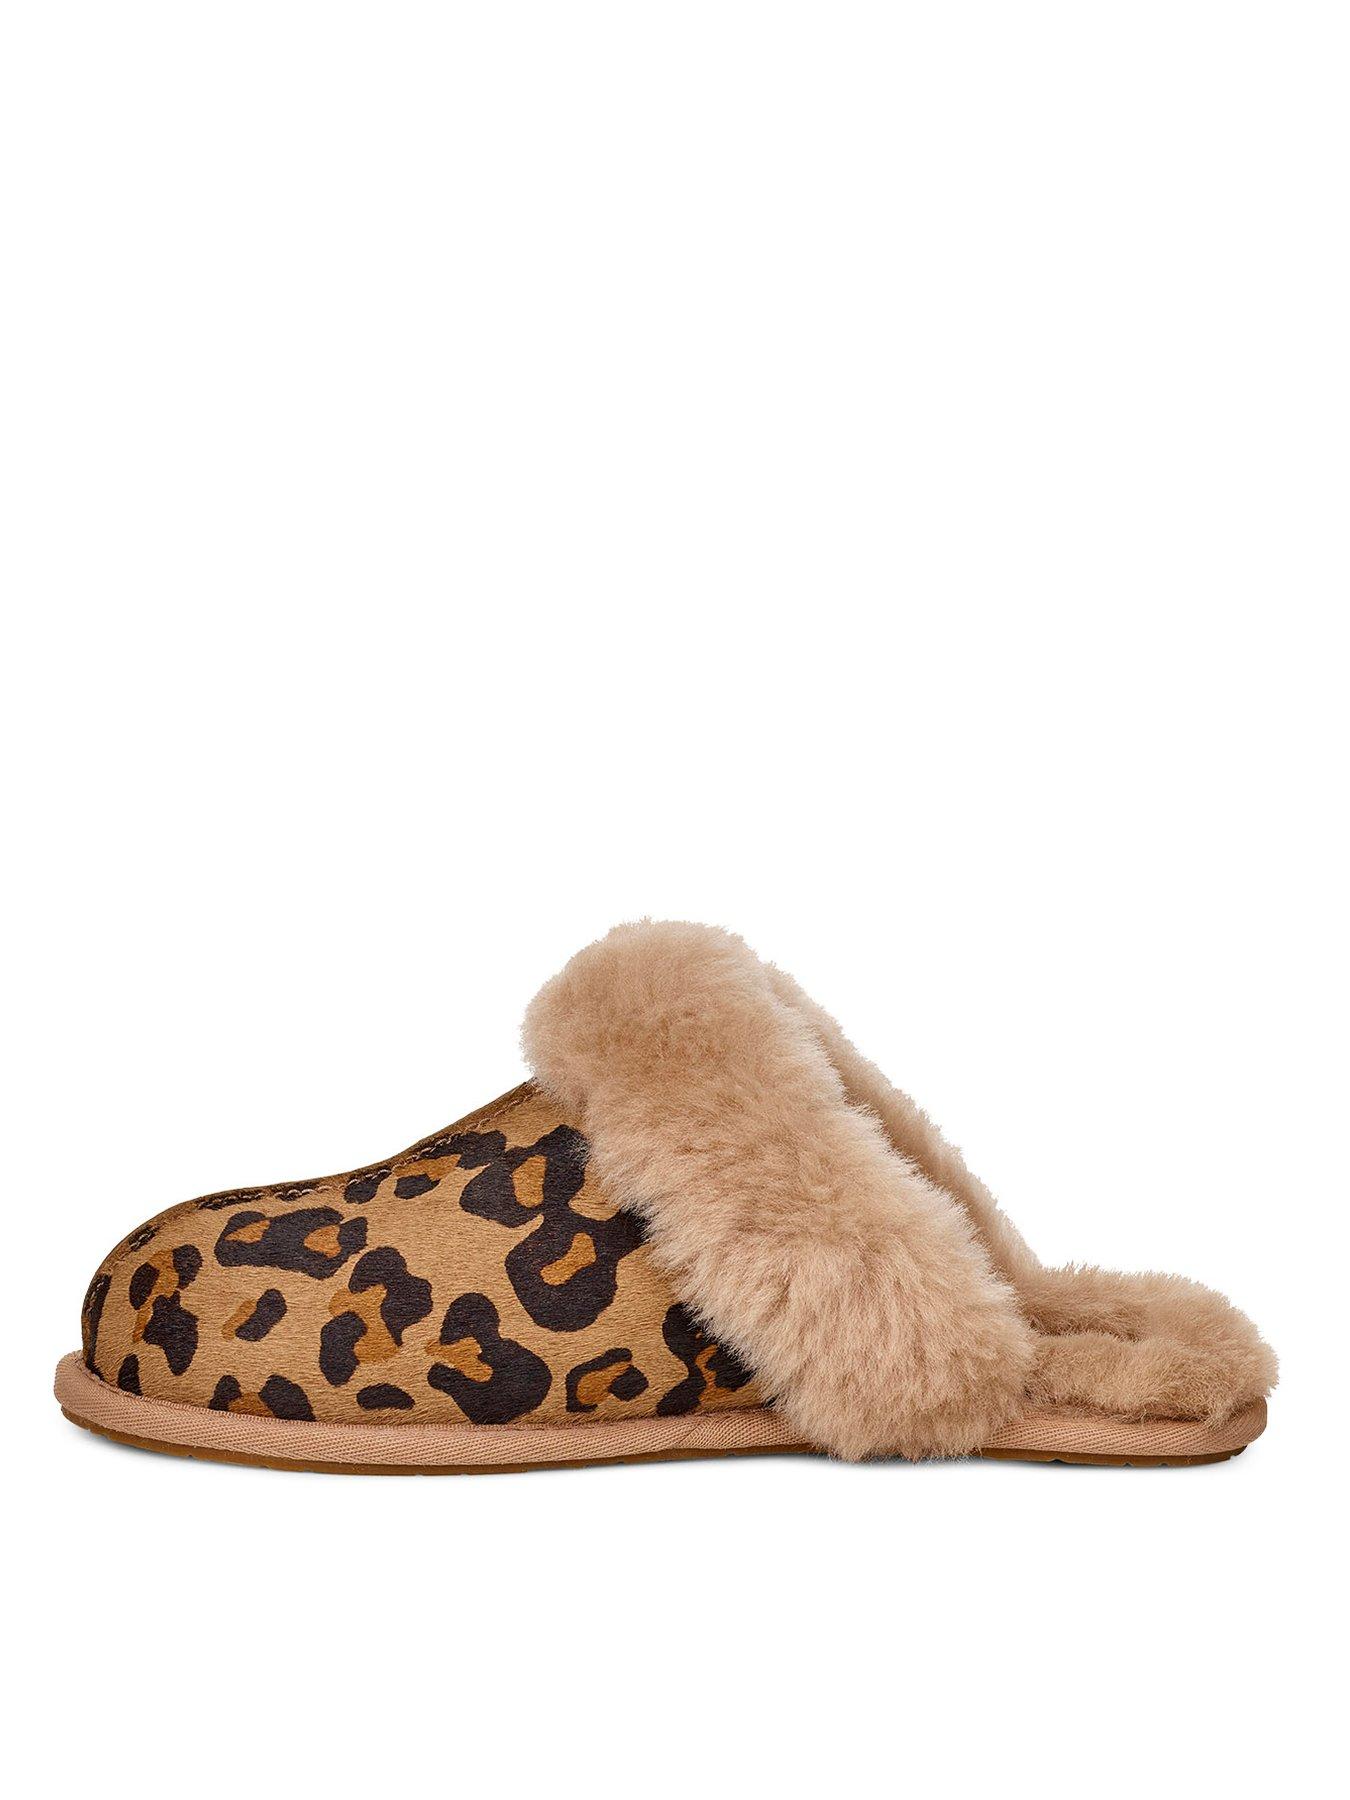 leopard print uggs slippers